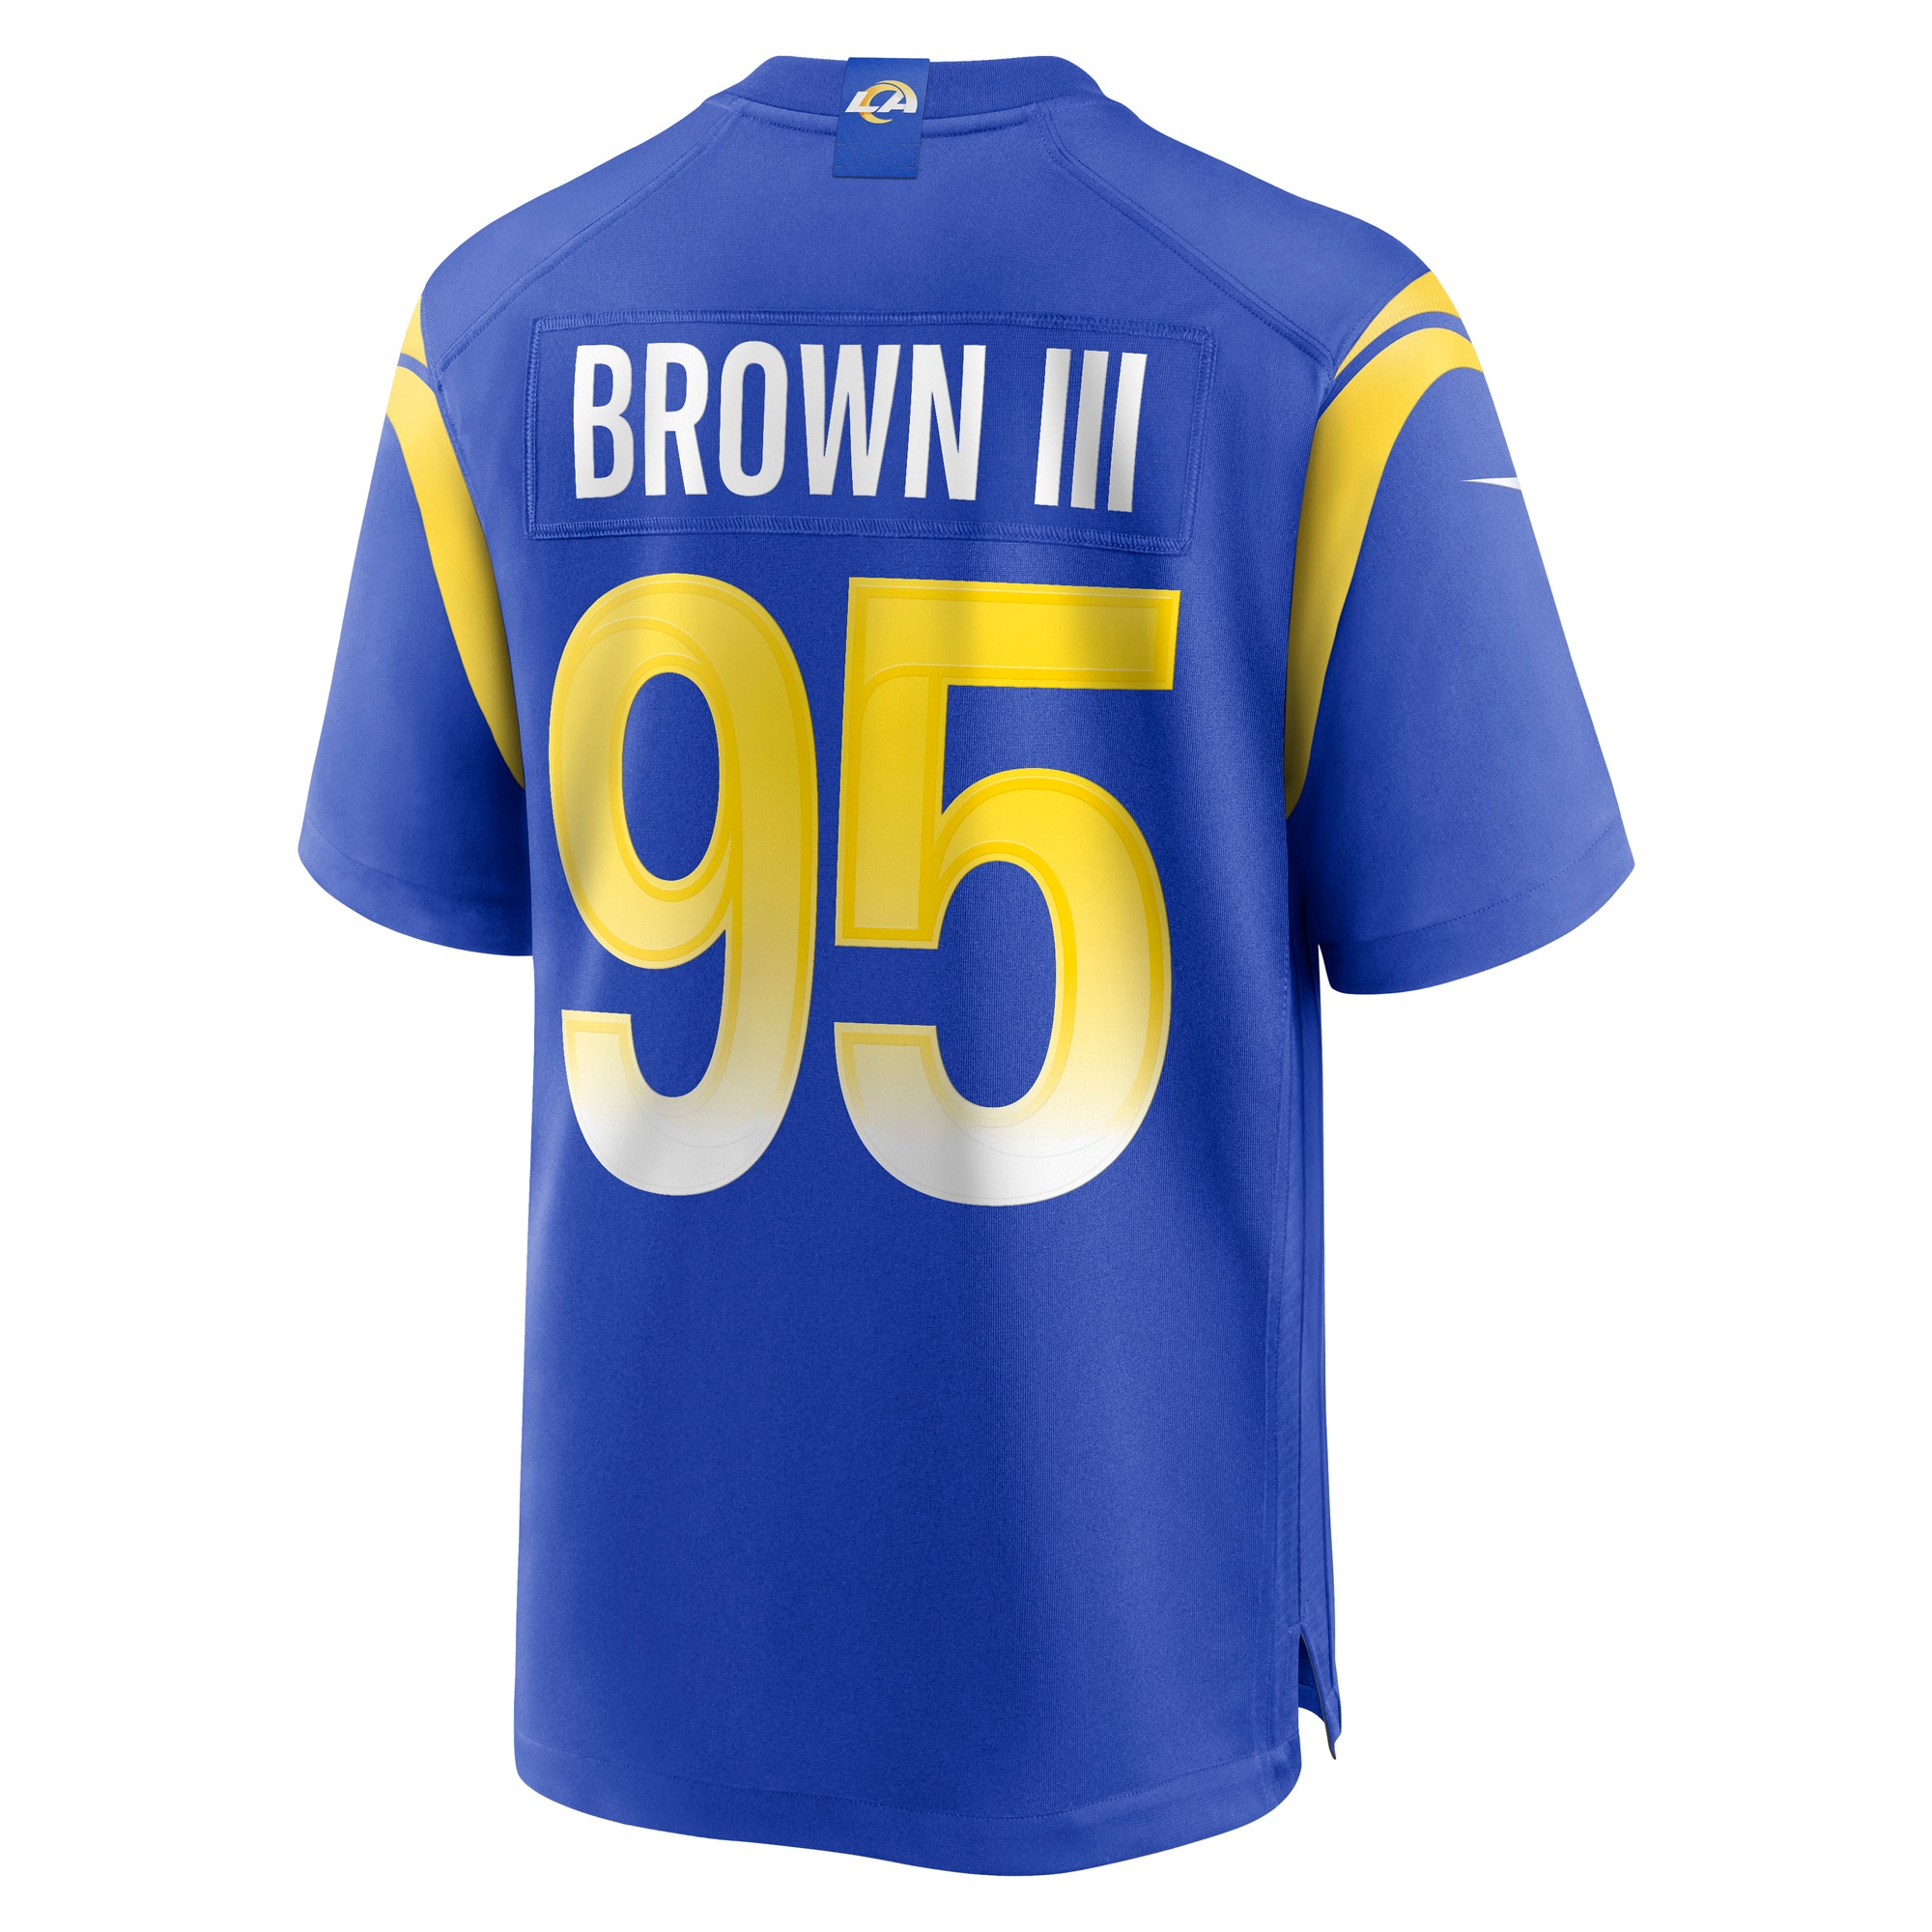 Men's Los Angeles Rams Jerseys Royal Bobby Brown III Game Style